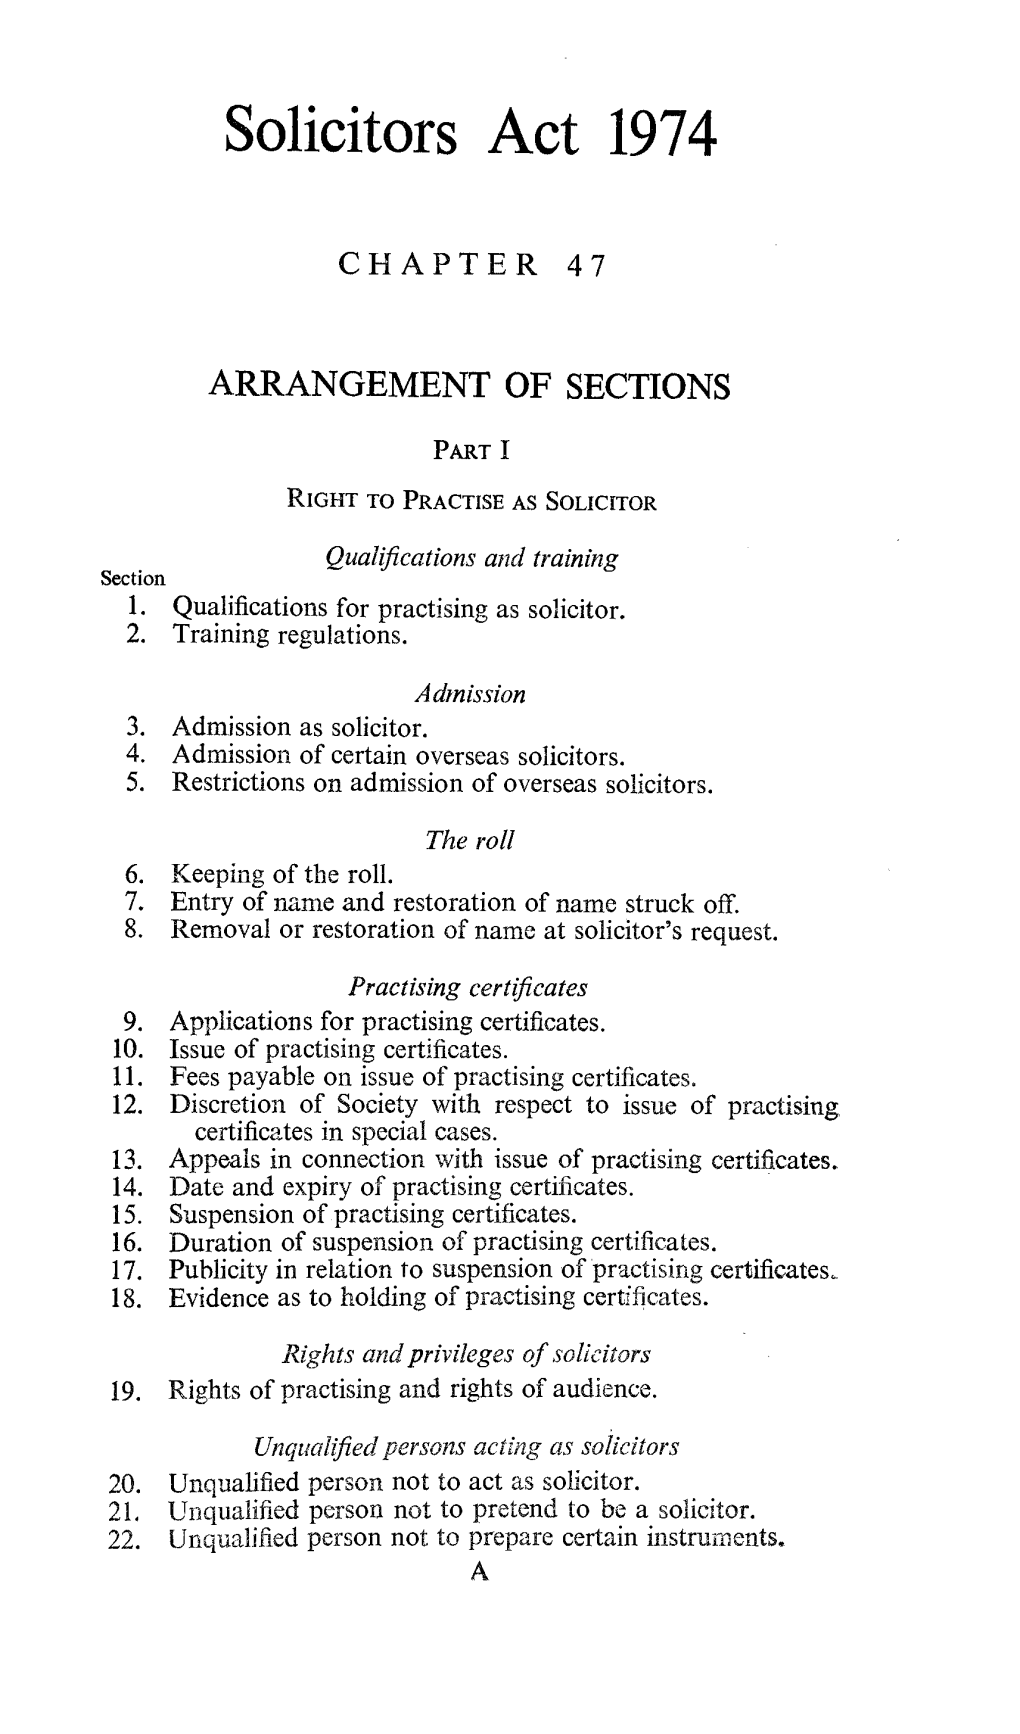 Solicitors Act 1974